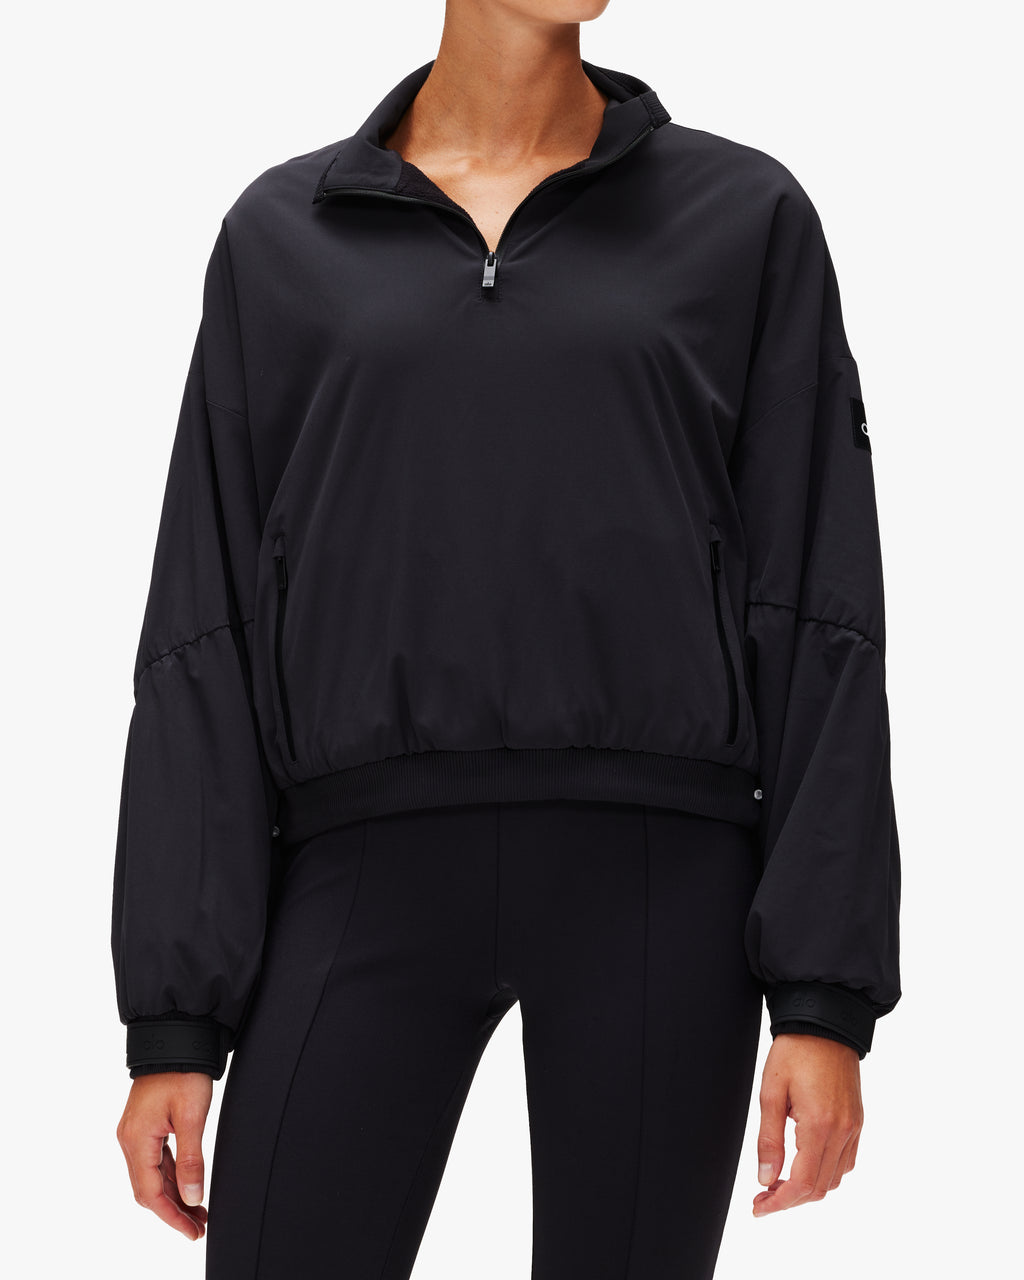 Alo Yoga Cropped Elevation Coverup – The Shop at Equinox